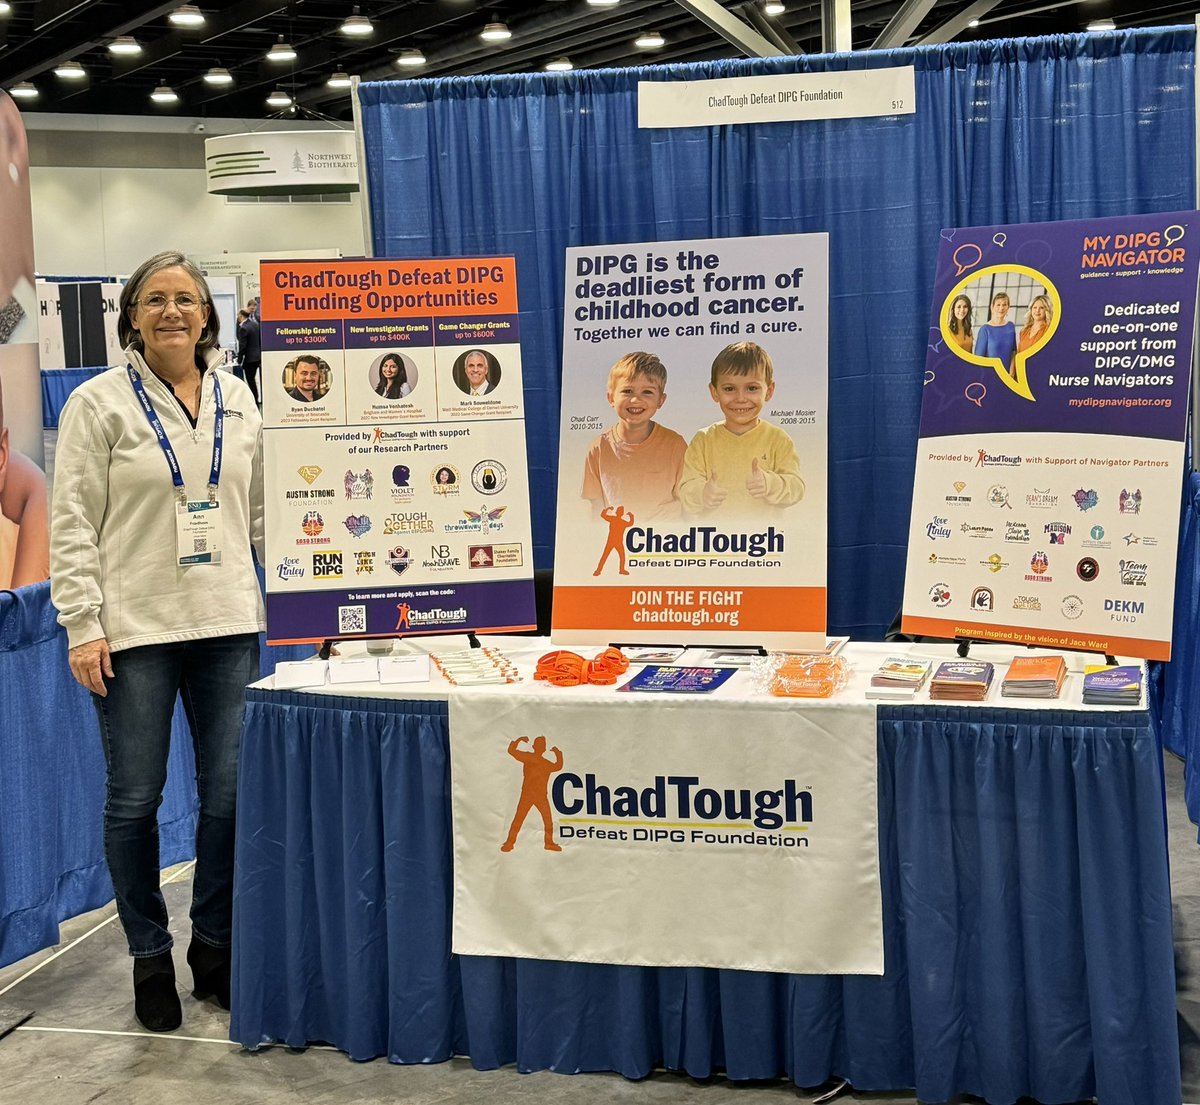 Tammi Carr - Co-Founder - ChadTough Defeat DIPG Foundation